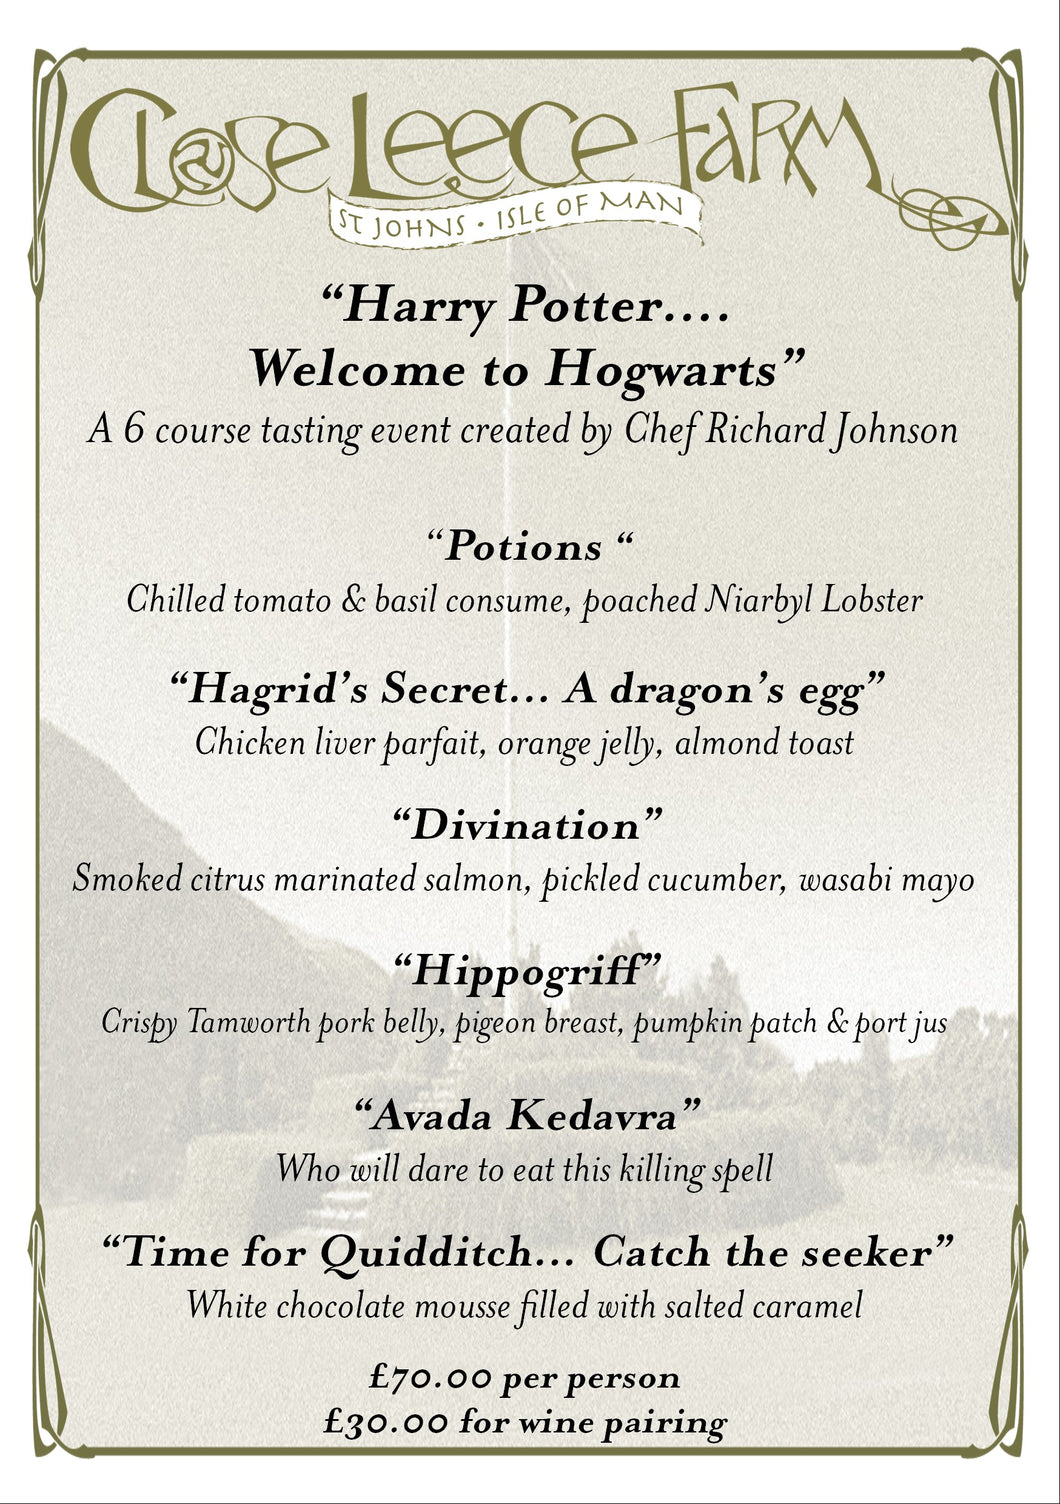 Book seats at our 6 course 'Harry Potter' tasting menu dinner